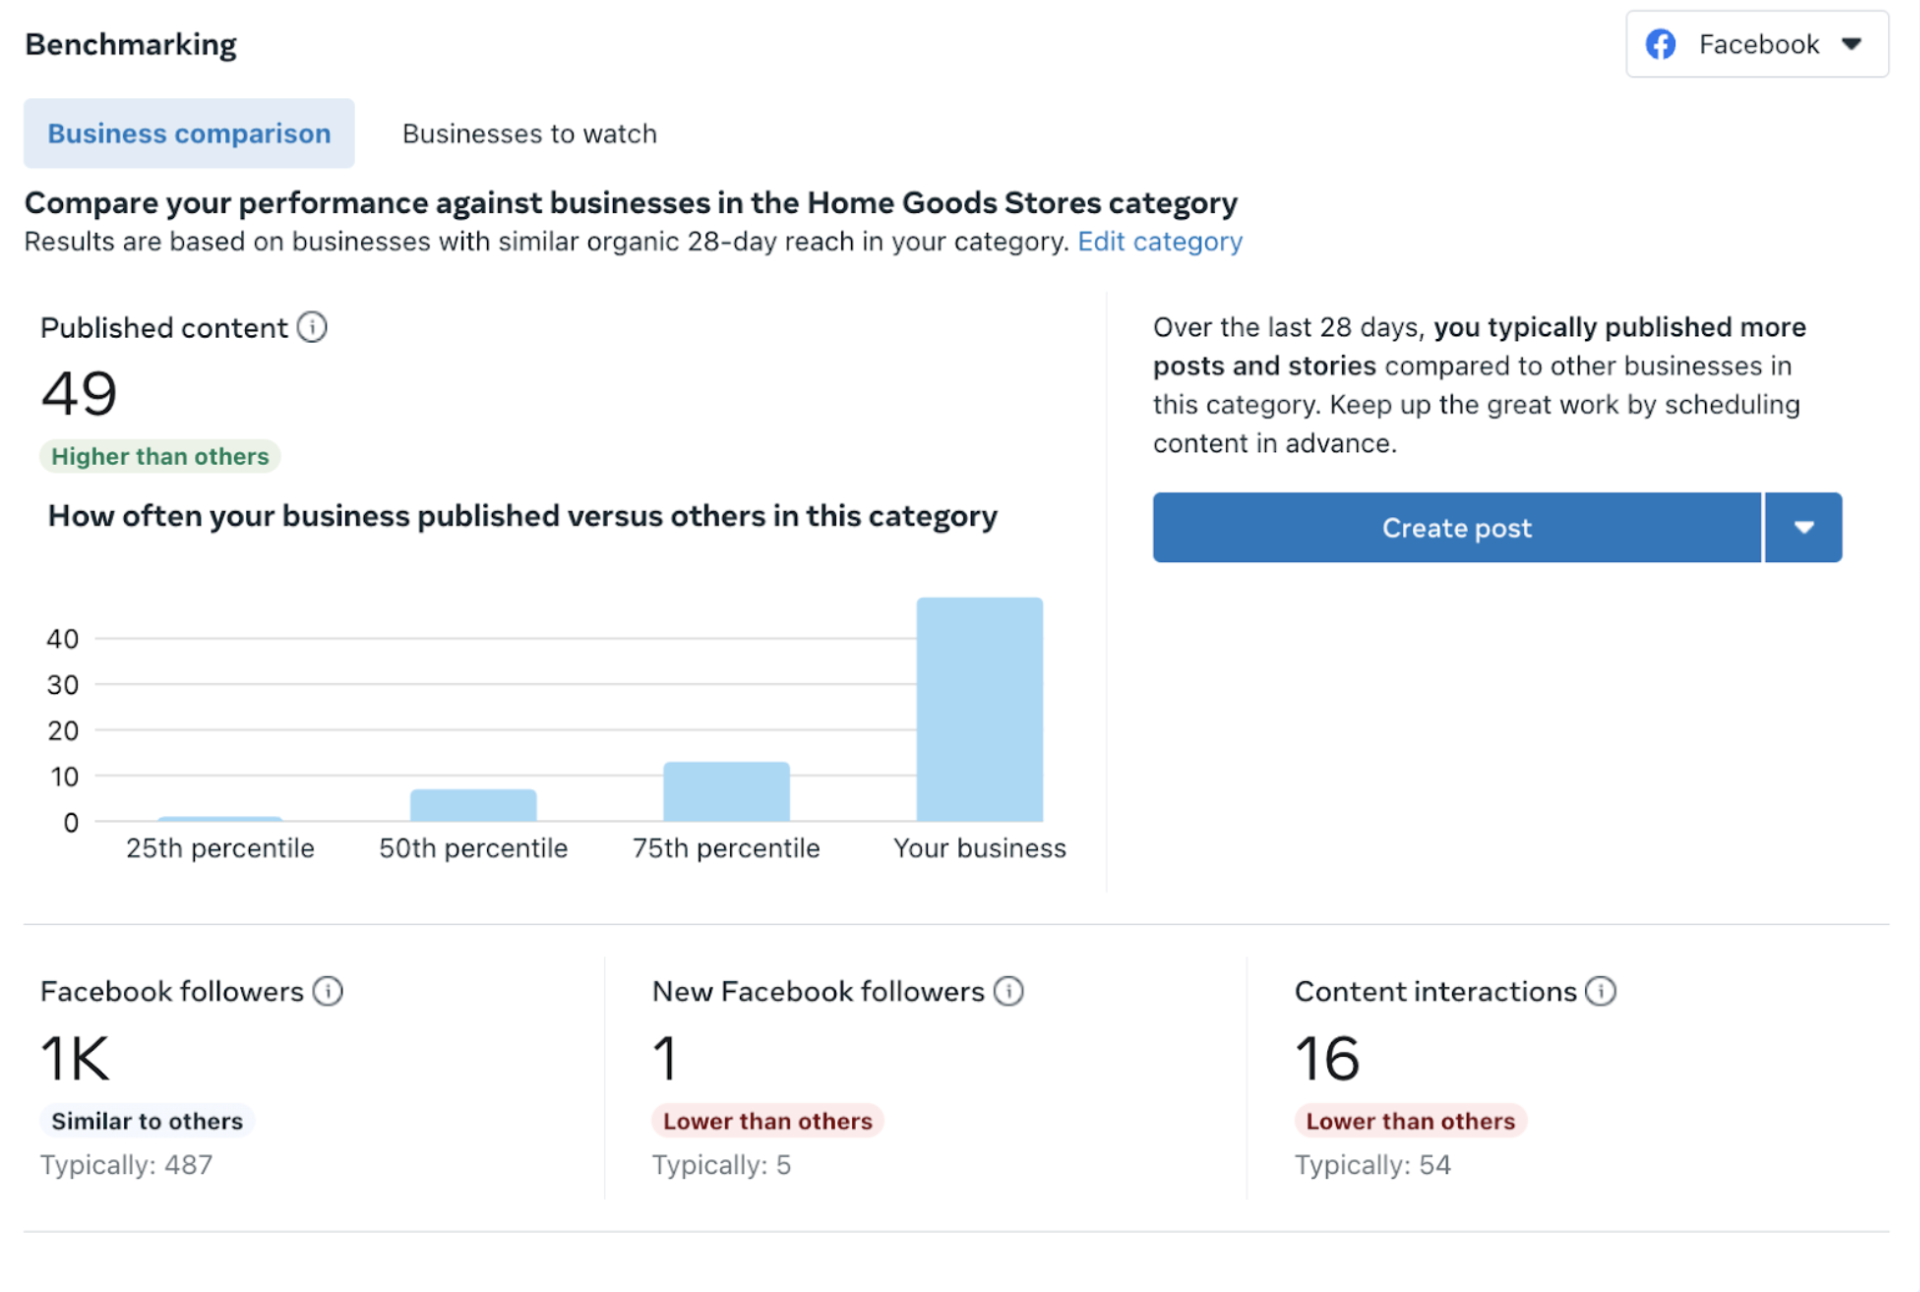 Preview of Benchmarking insights in Creator Studio. The image shows benchmarking data of business competition such as published content, Facebook followers, new Facebook followers and content interactions.